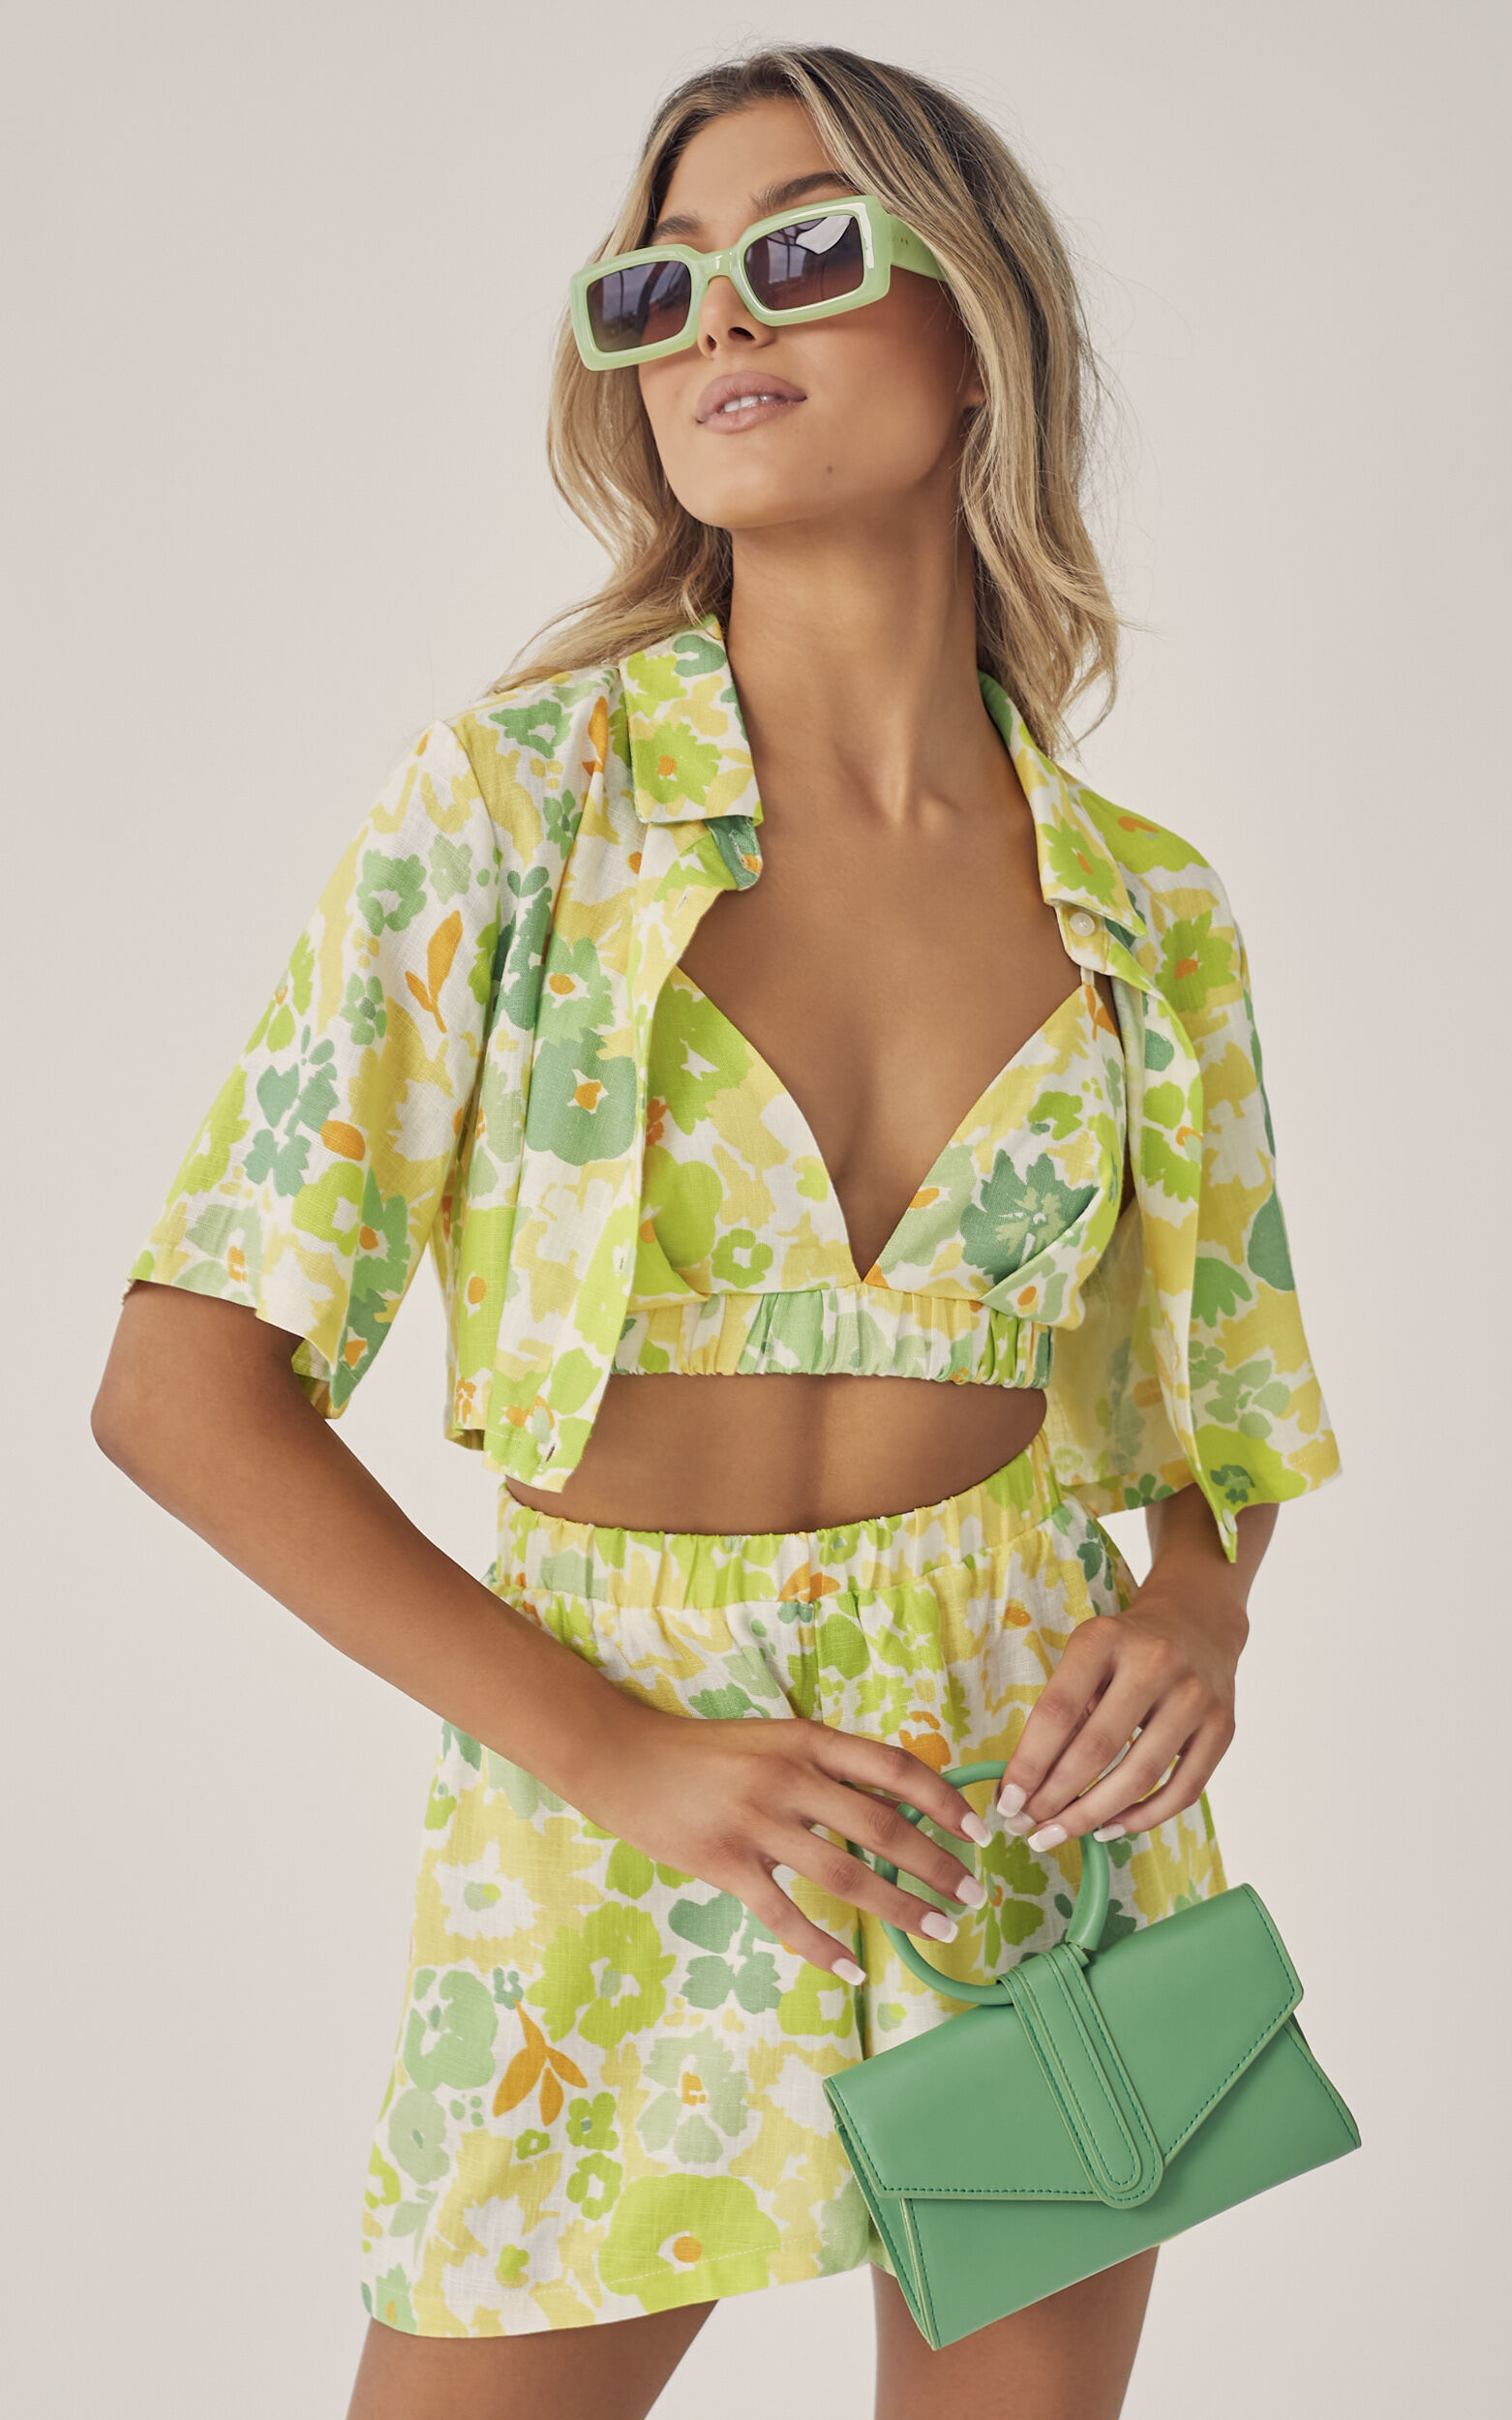 Nikoletta Collared Shirt Three Piece Set in Pine Lime Print - 04, GRN1, super-hi-res image number null